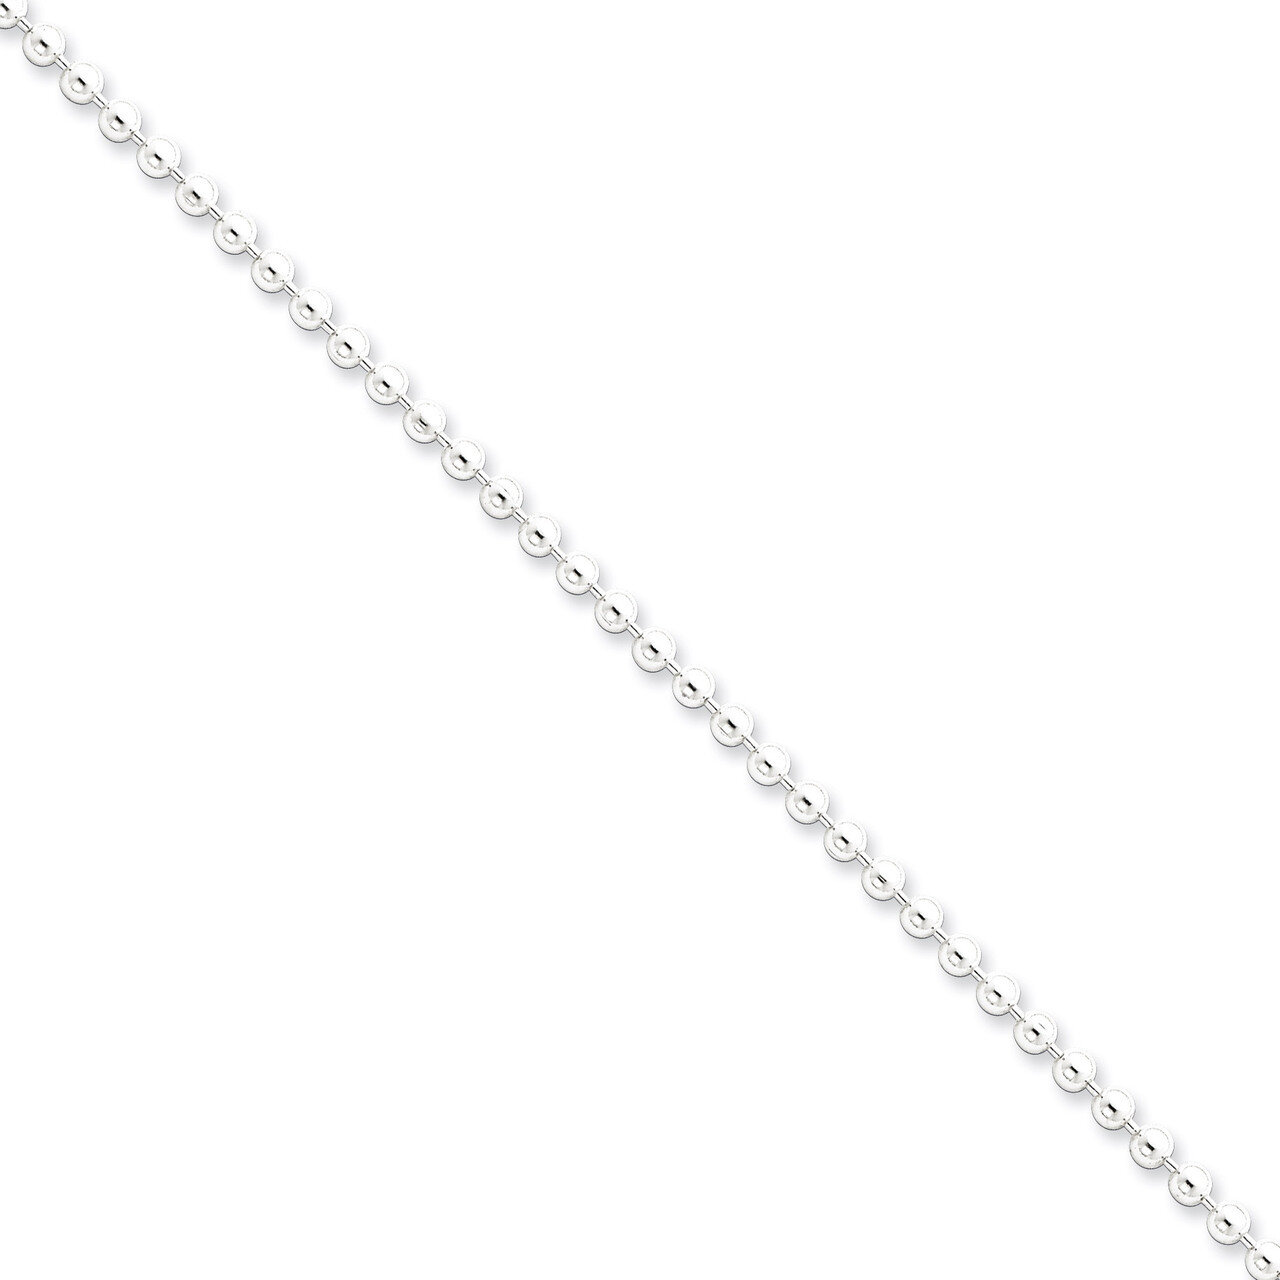 20 Inch 3mm Beaded Chain Sterling Silver QK83-20